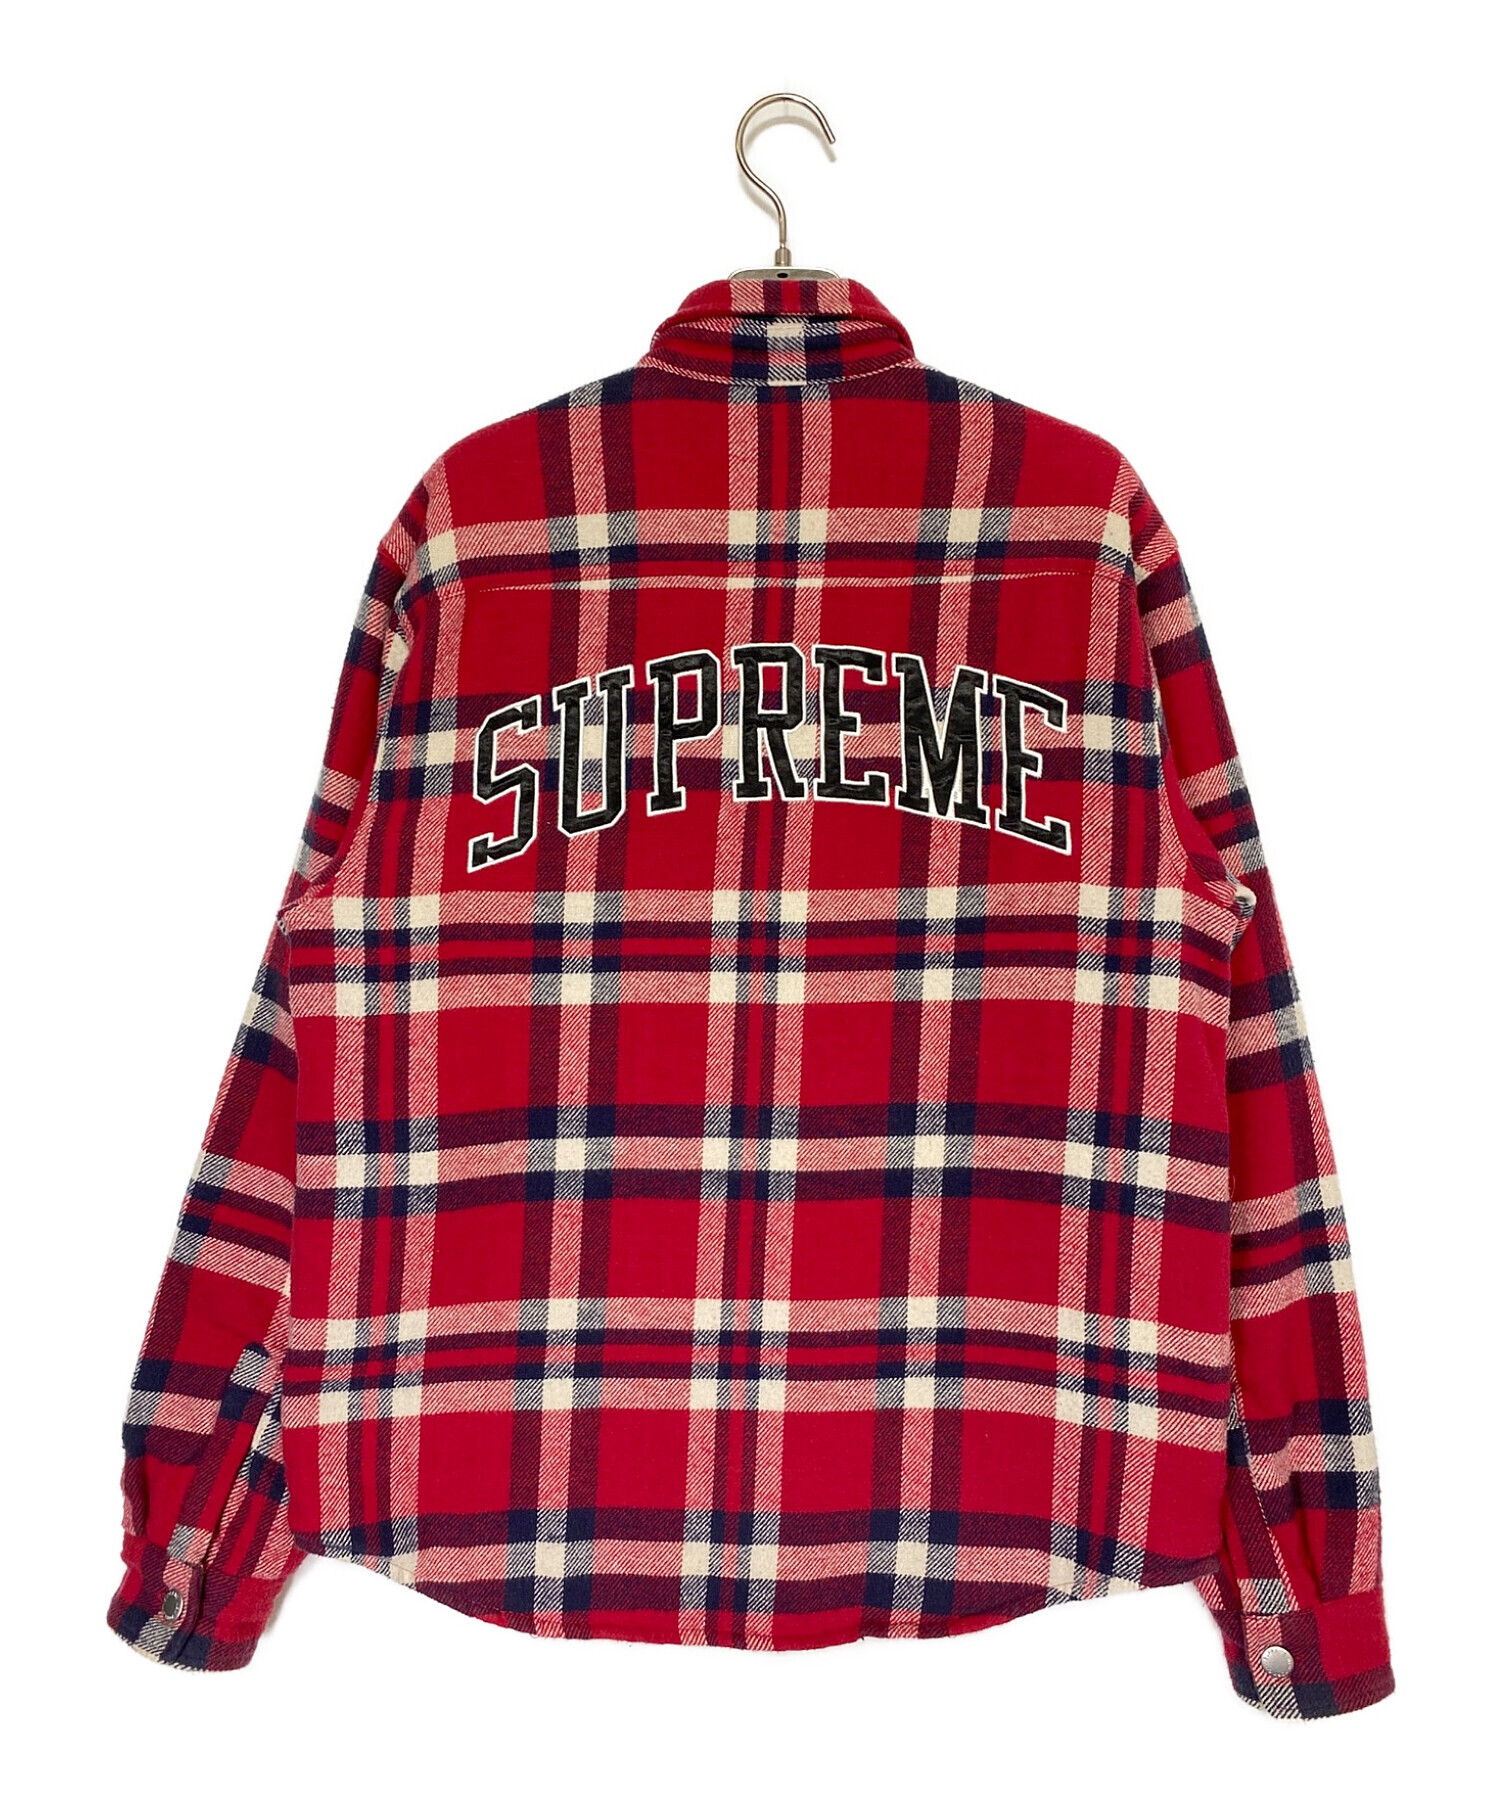 Mサイズ Supreme Quilted Flannel Shirt レッド